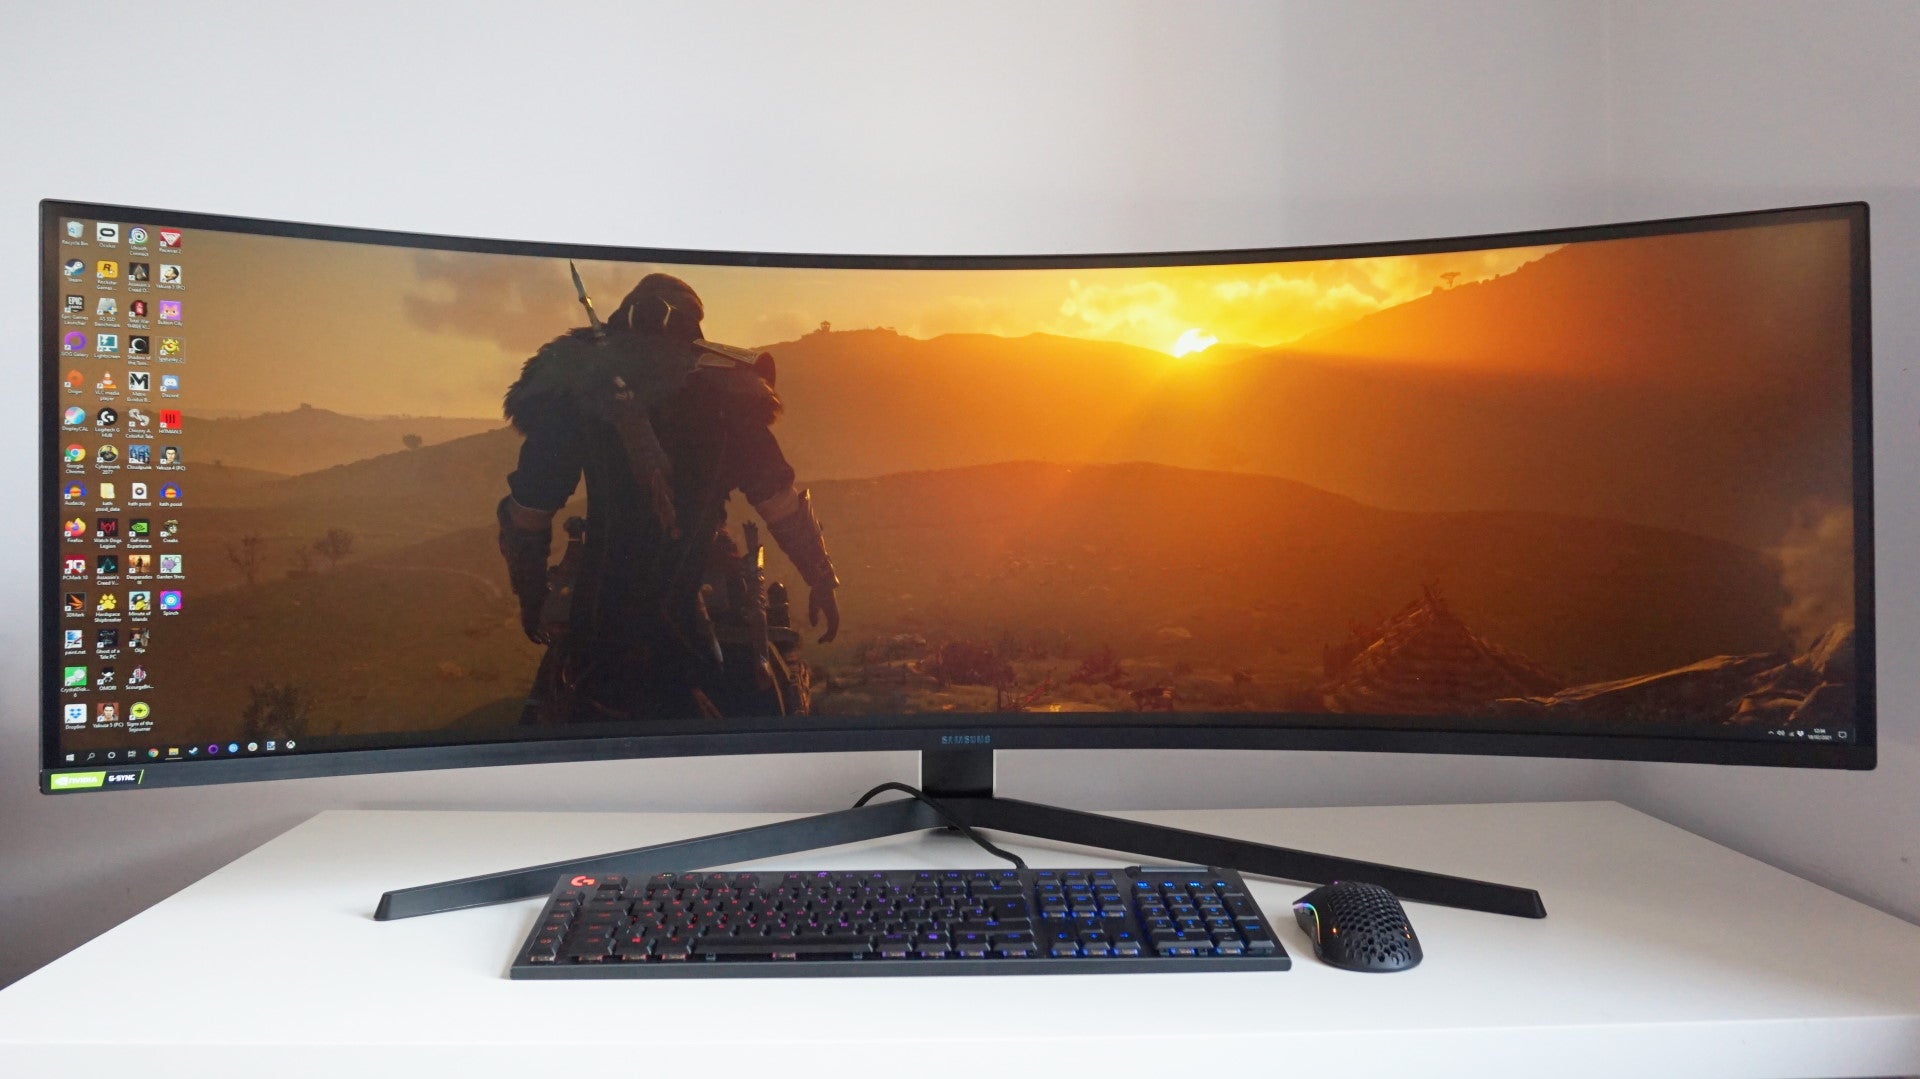 A photo of the Samsung Odyssey G9 gaming monitor